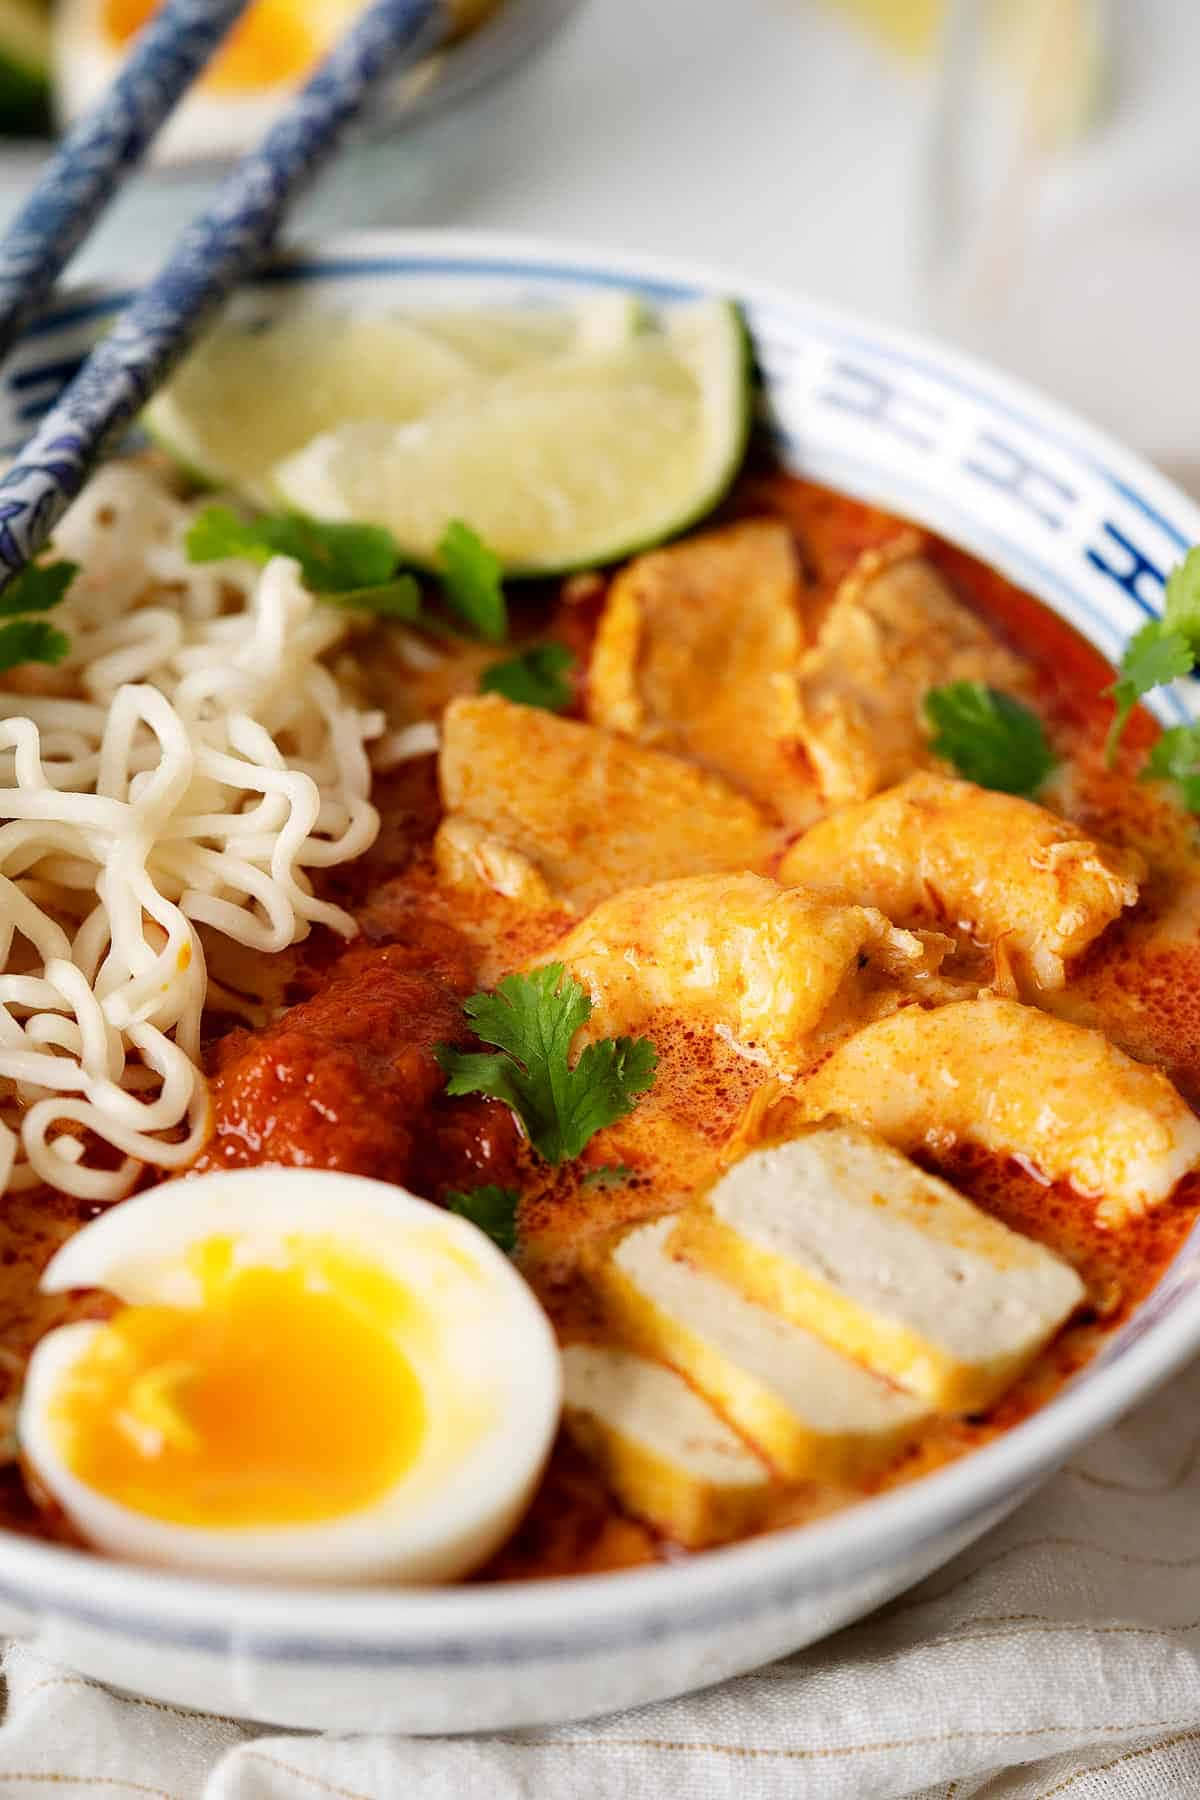 Malaysianred Curry Laksa Is Not A Sentence Related To Computer Or Mobile Wallpapers. Could You Please Provide A Sentence Related To Wallpapers That You Would Like To Have Translated Into Italian? Sfondo